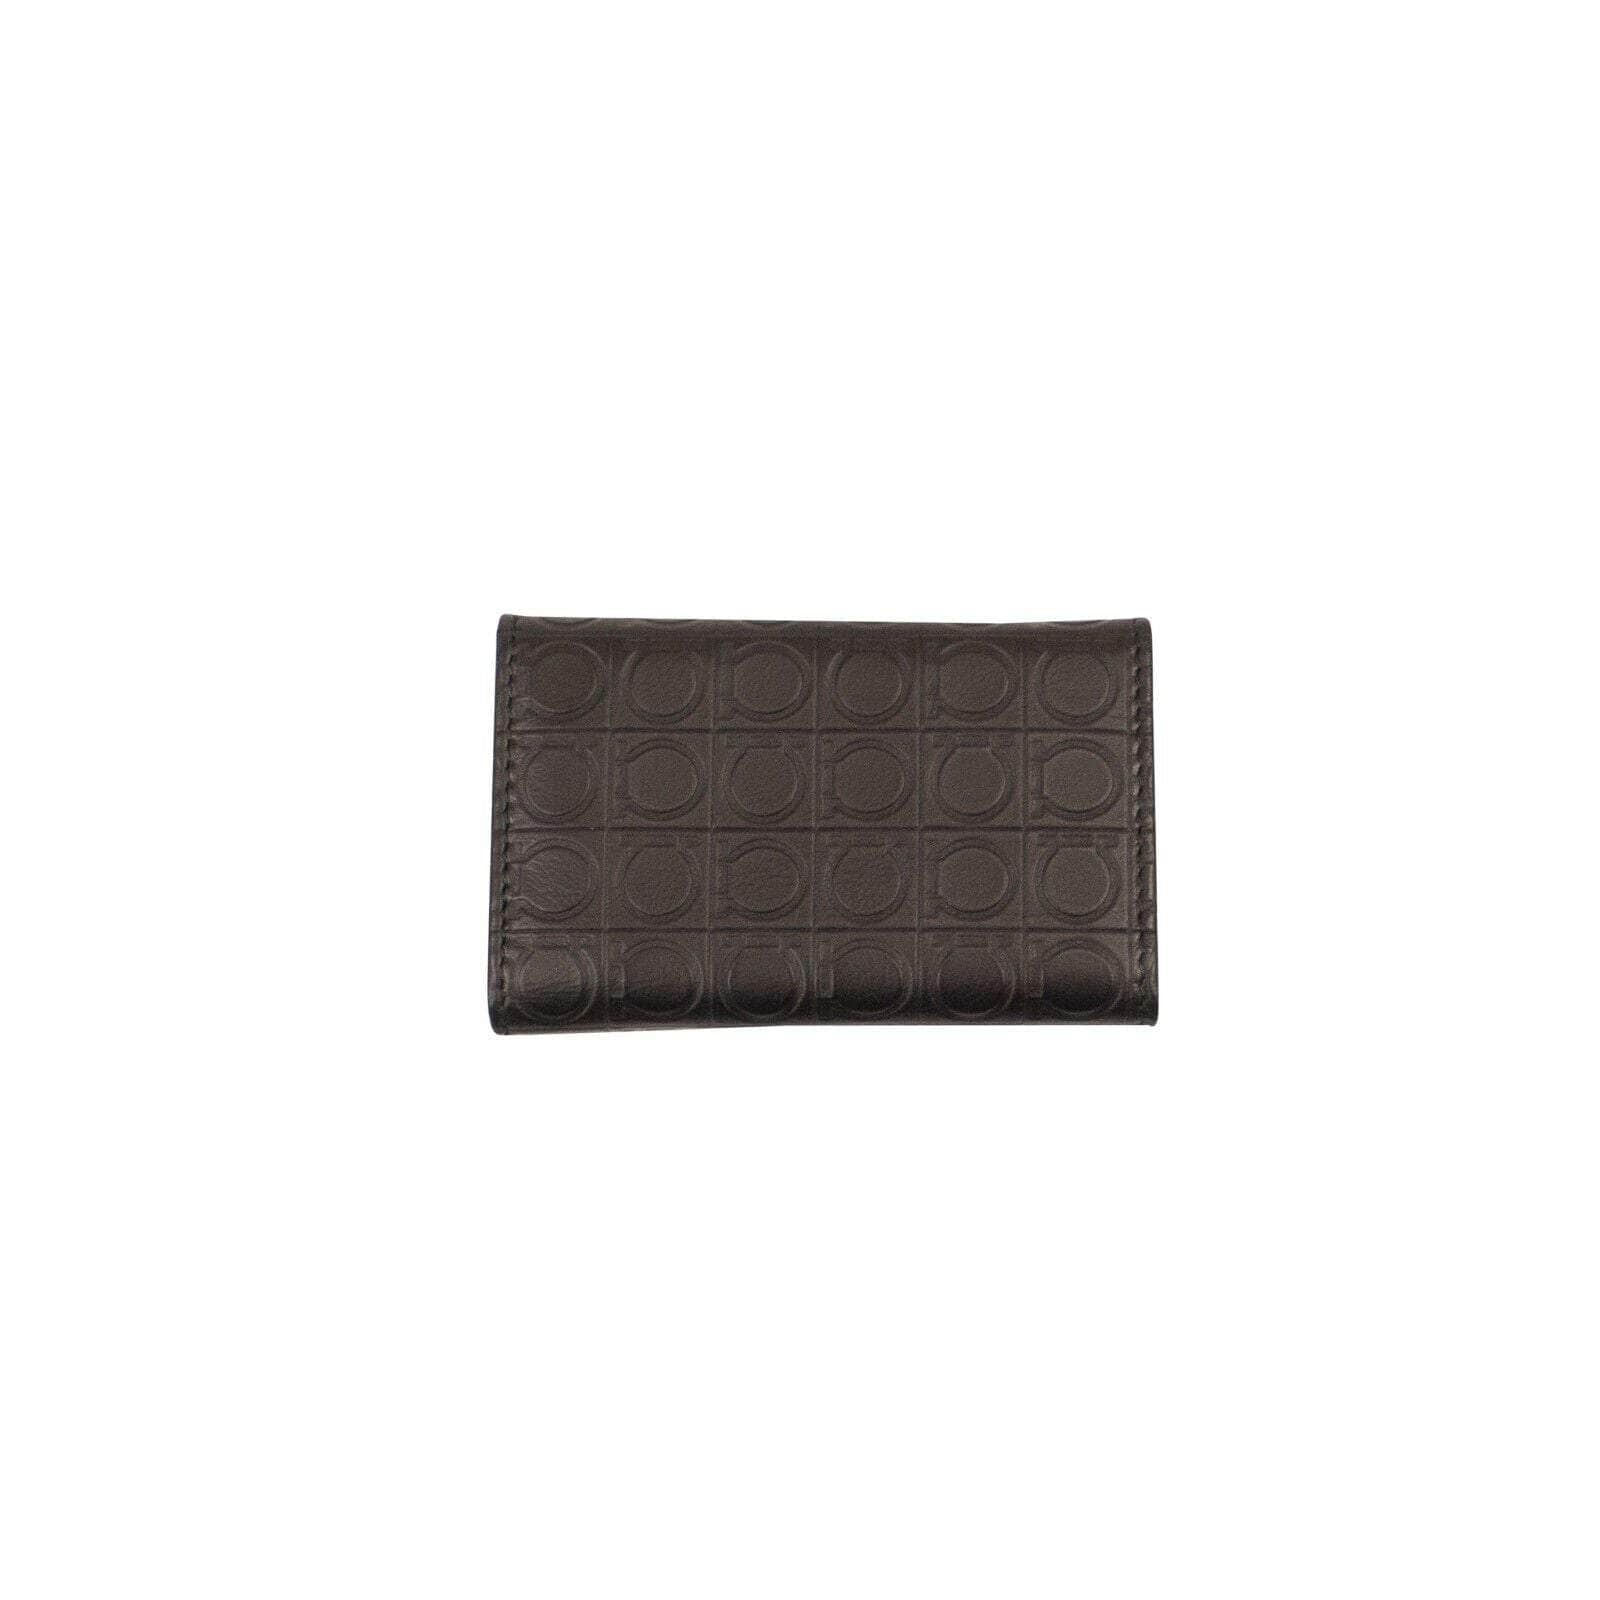 Salvatore Ferragamo channelenable-all, chicmi, couponcollection, gender-mens, main-accessories, mens-pouches, mens-shoes, shop375, under-250 OS Black Embossed Logo Tri Fold Wallet FRG-XACC-0001/OS FRG-XACC-0001/OS